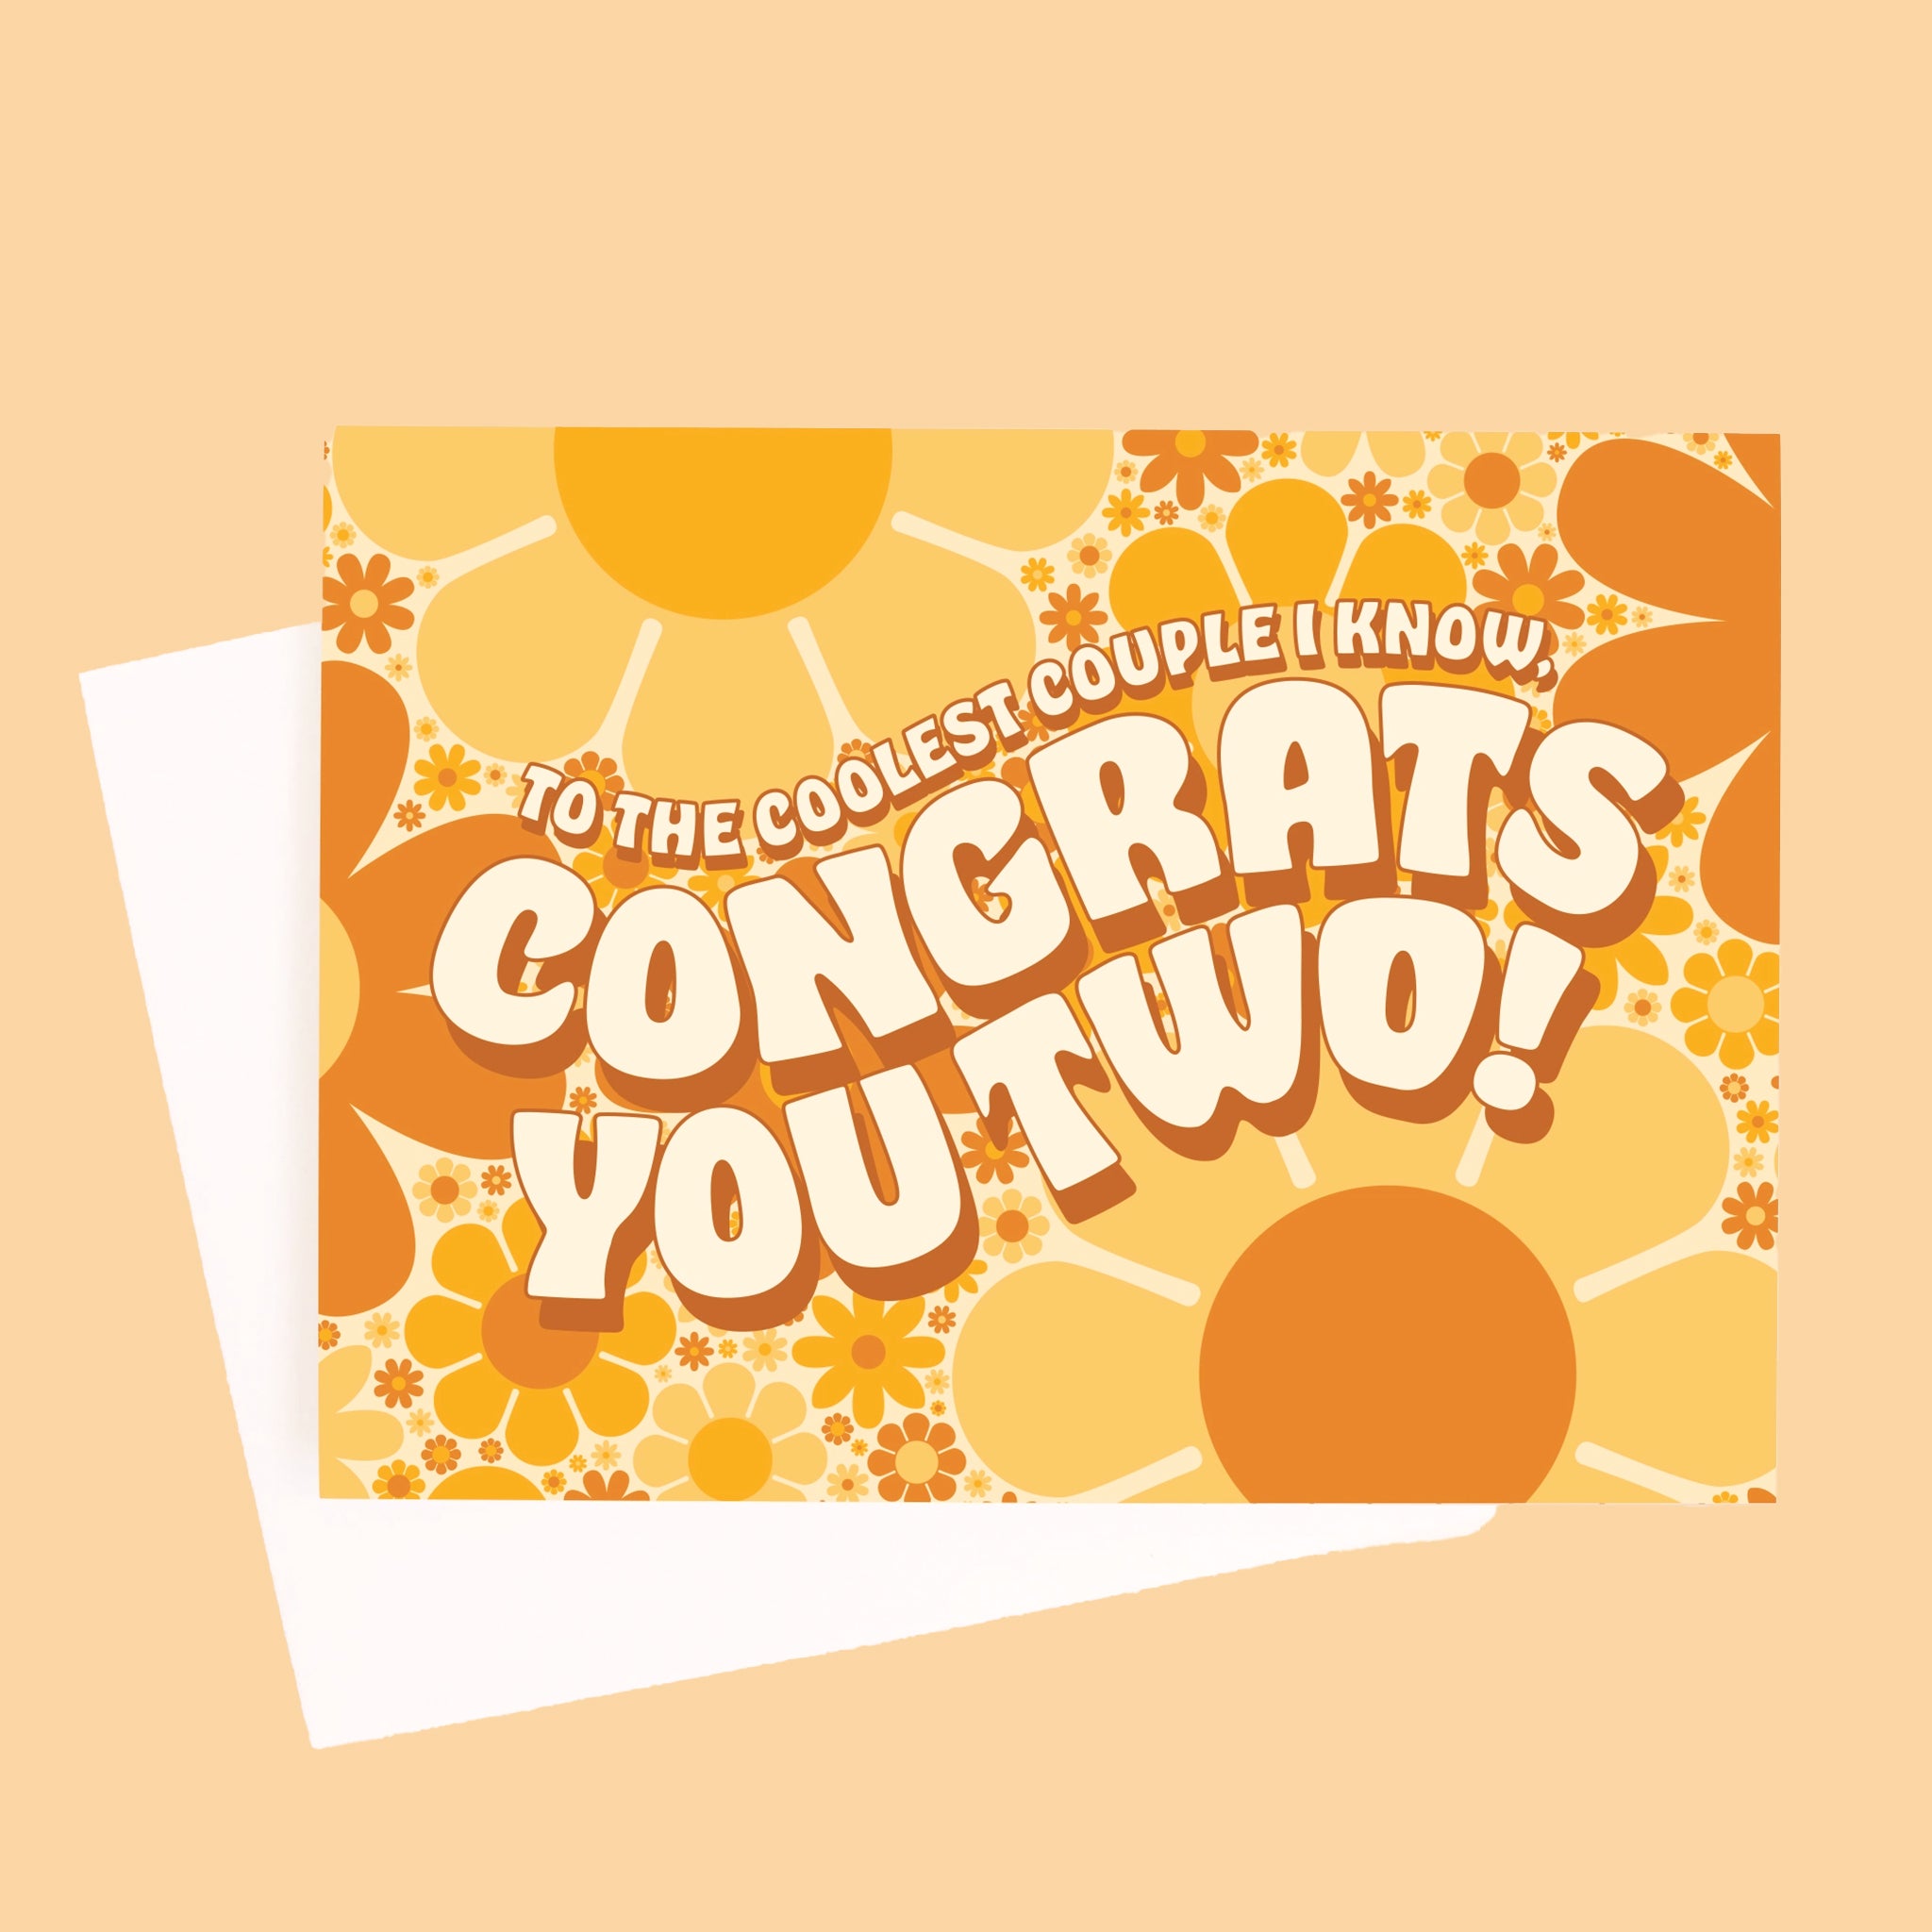 On a yellow background is a daisy print congratulations card with shades of orange and brown along with wavy text in the center that reads, "To The Coolest Couple I Know, Congrats You Two!".